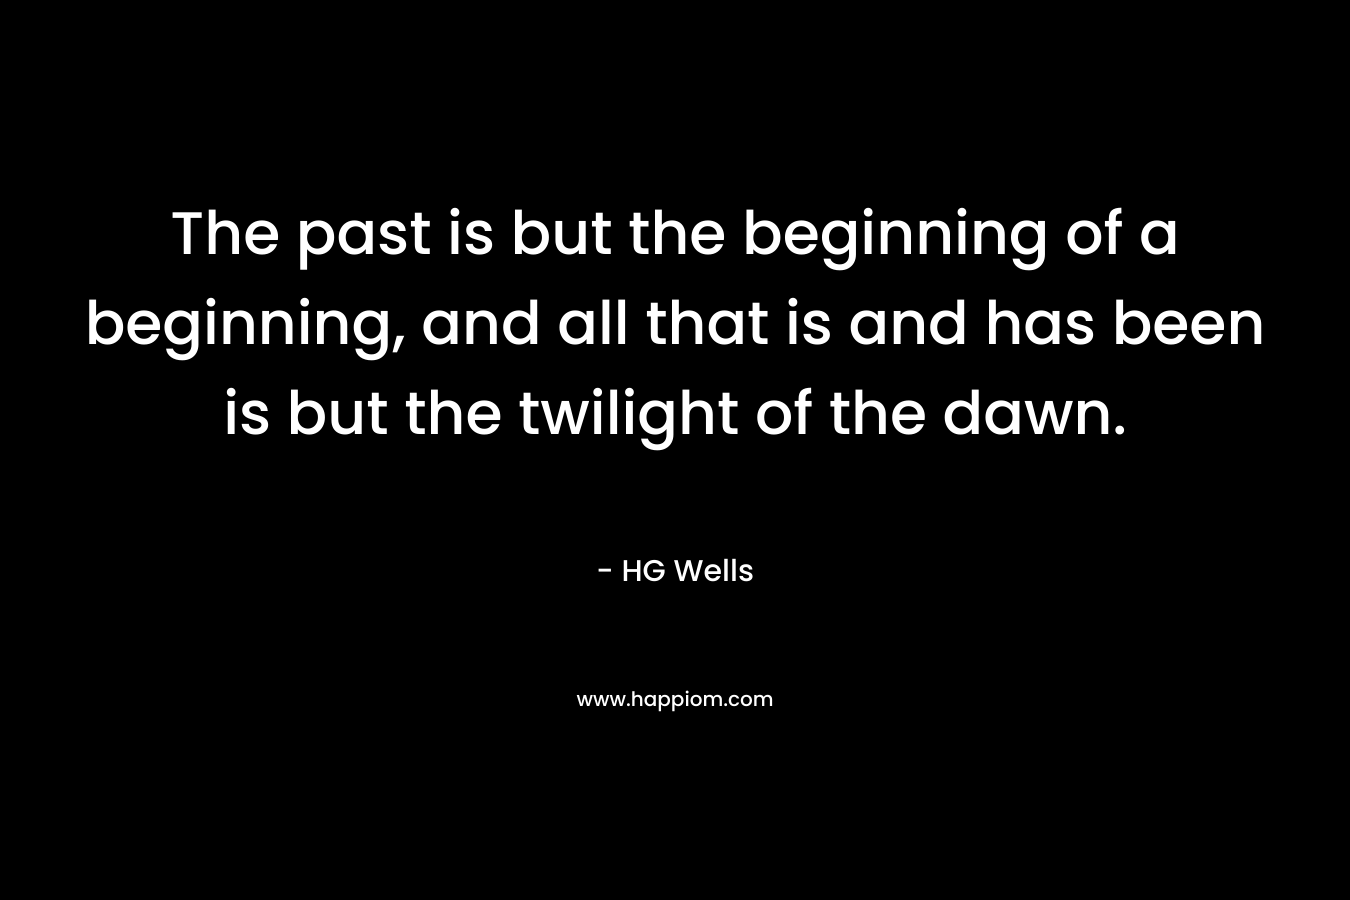 The past is but the beginning of a beginning, and all that is and has been is but the twilight of the dawn.